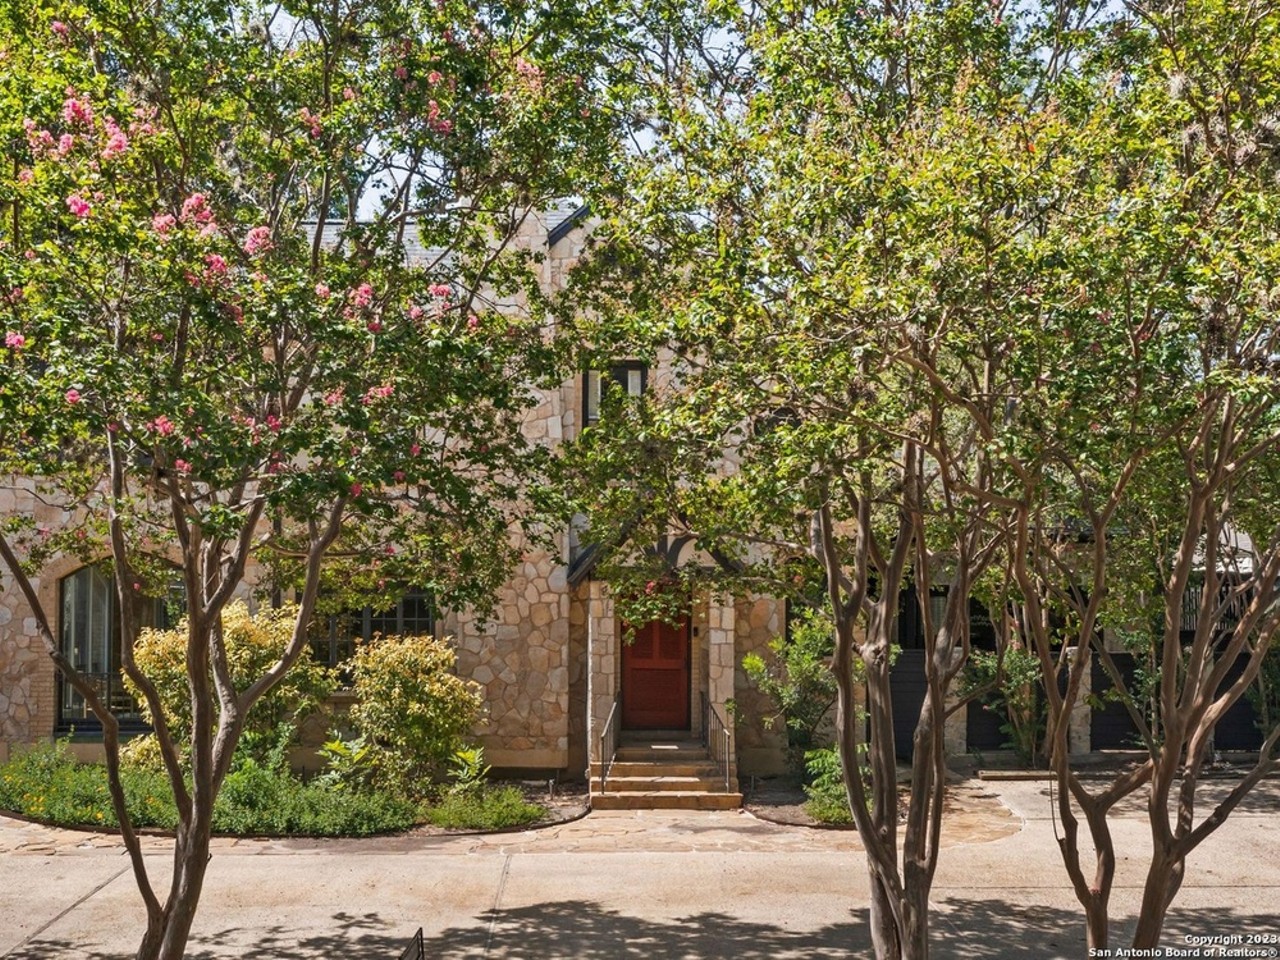 Decades years later, San Antonio restores childhood home, and now its for sale